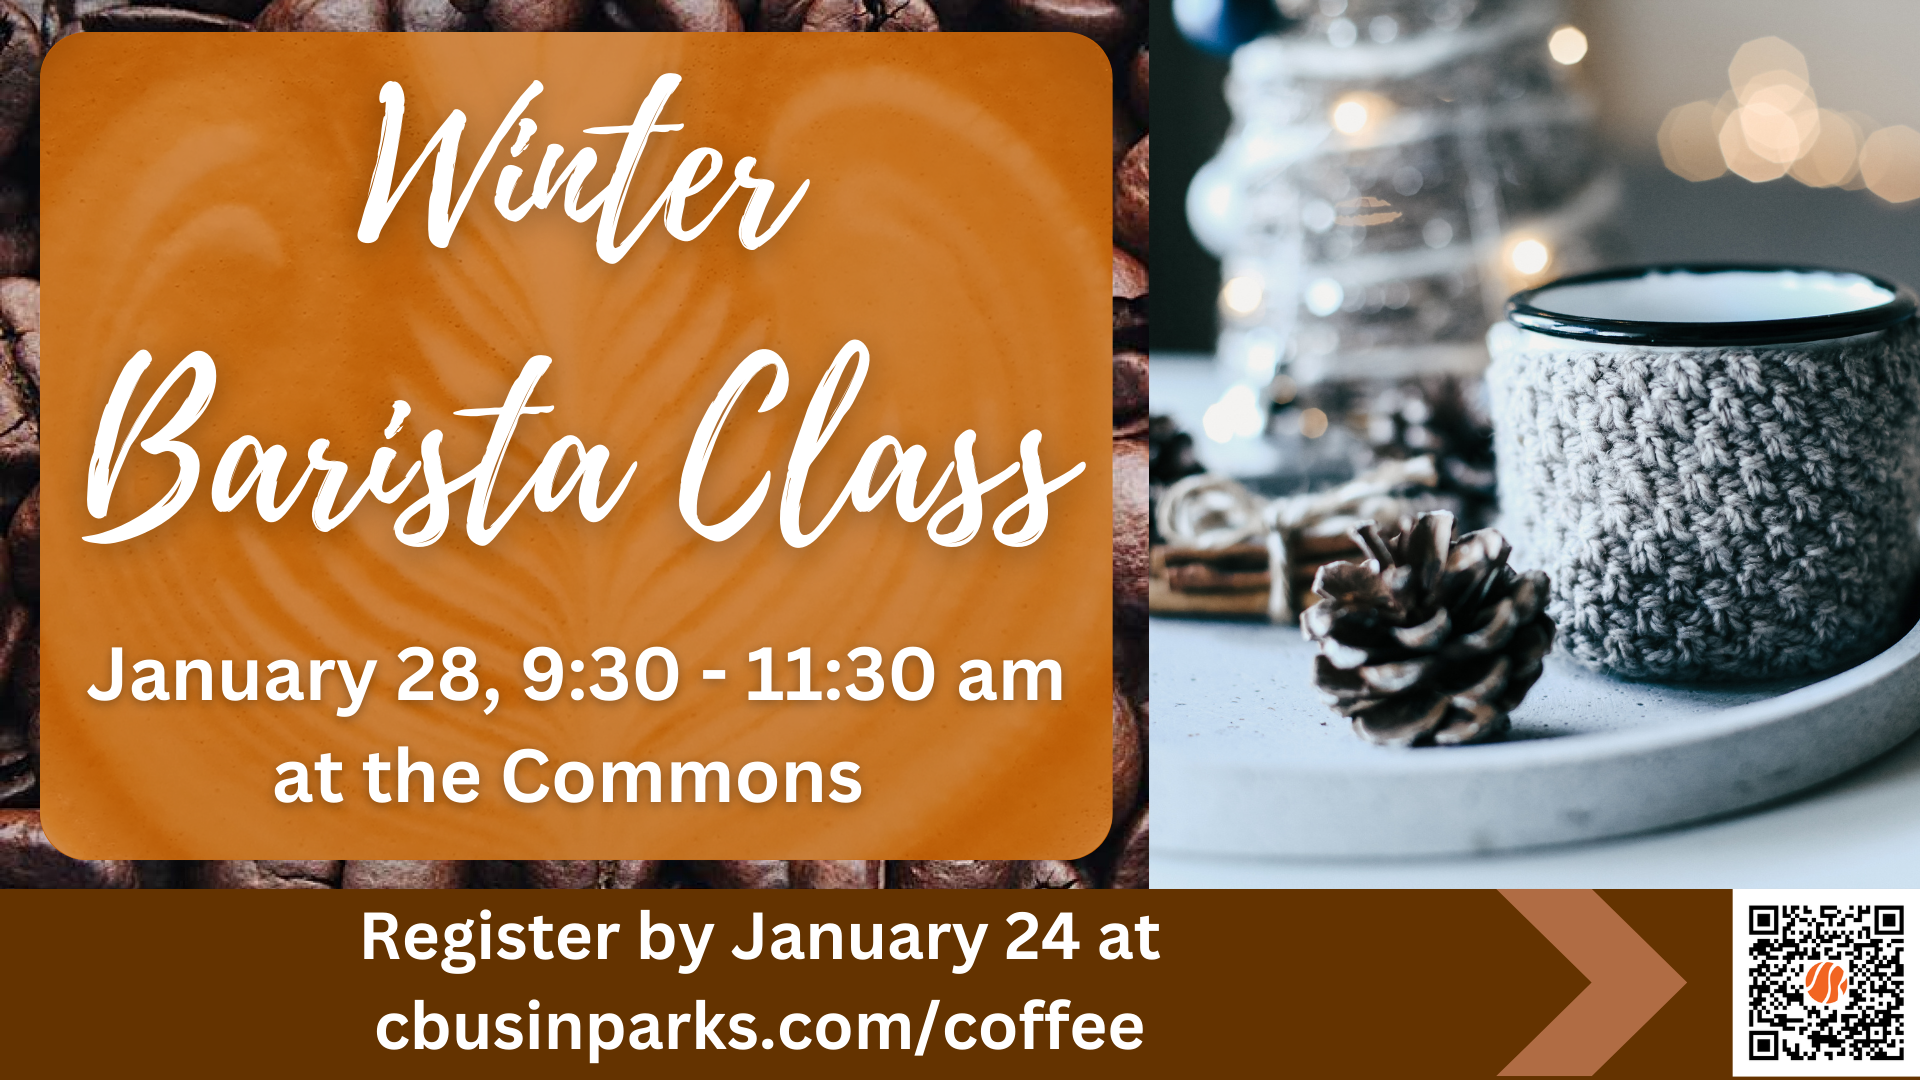 Winter Barista Class. January 28, 9:30-11:30am at the Commons. Register by January 24 at cbusinparks.com/coffee